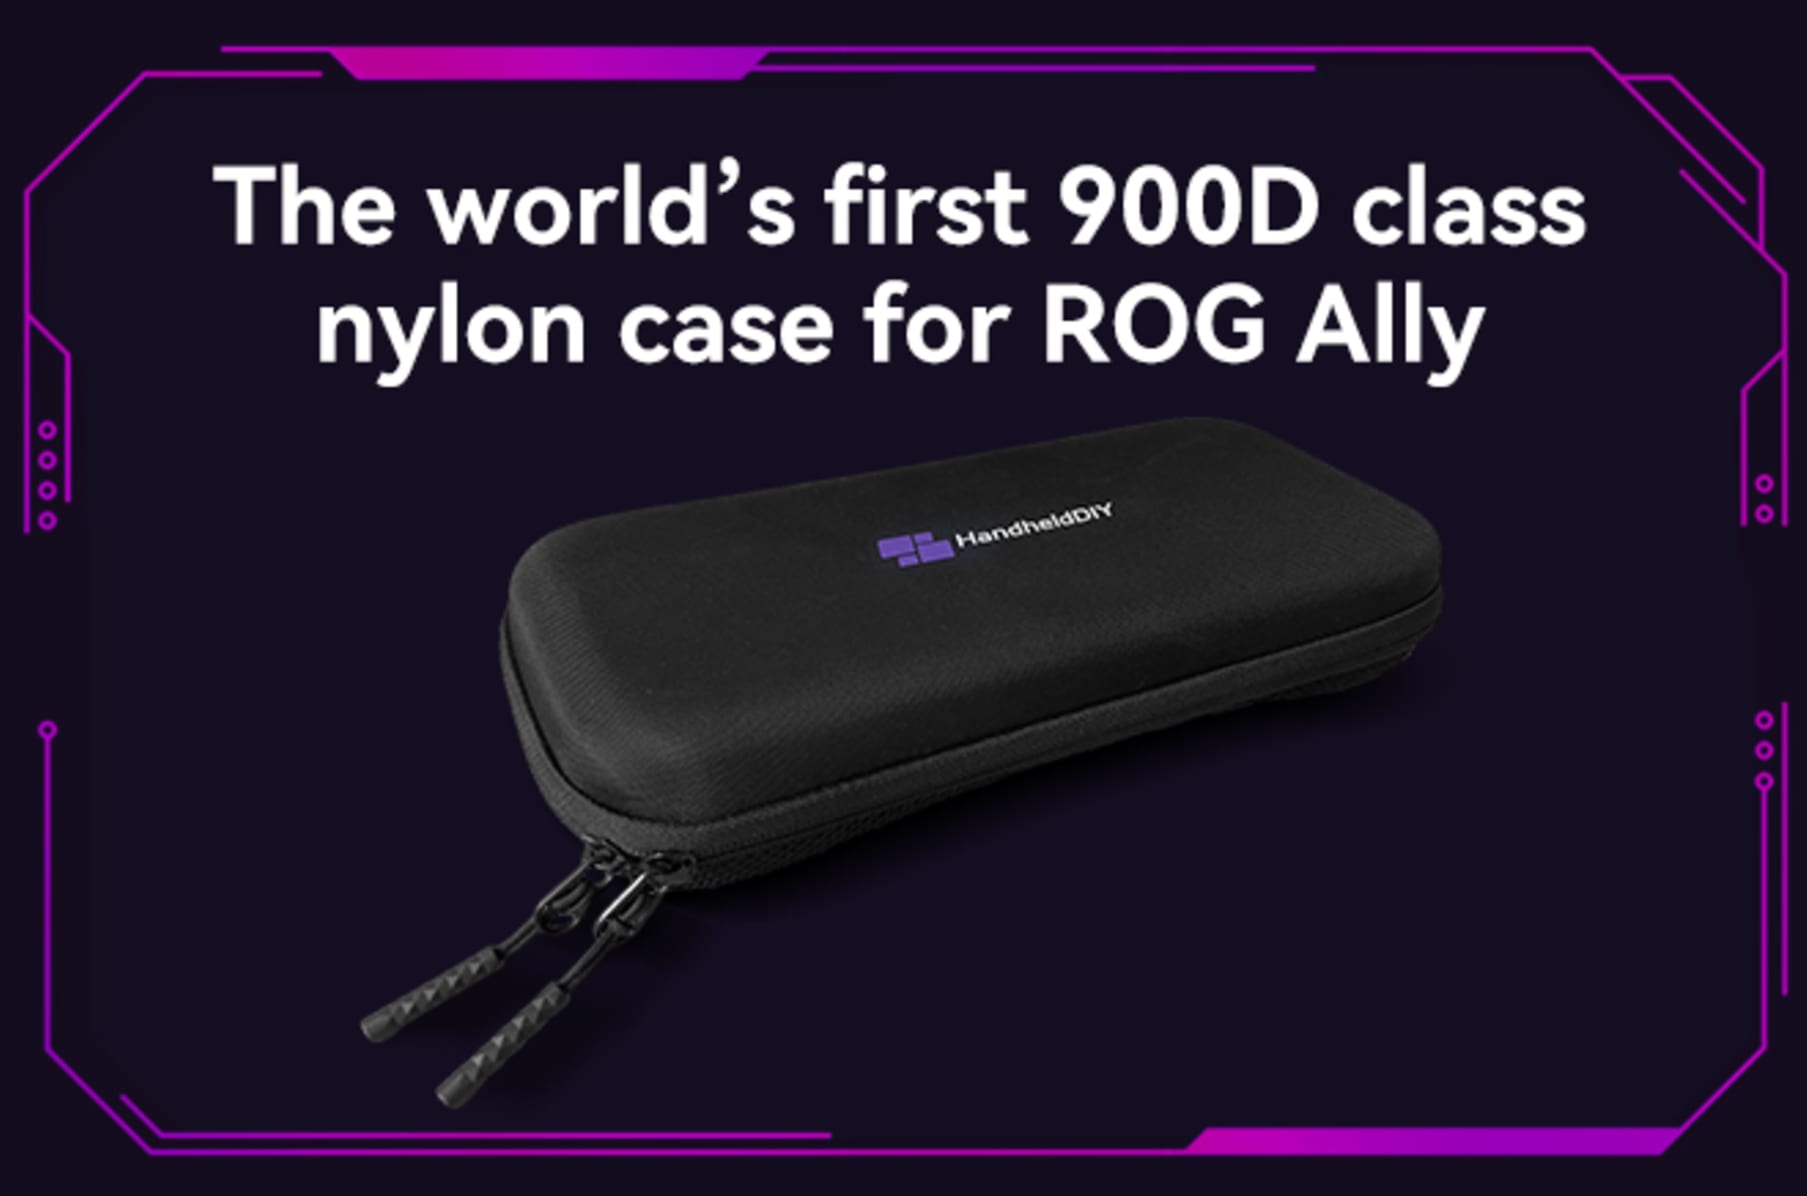 Dbrand Teases Killswitch Style Case For The ROG Ally